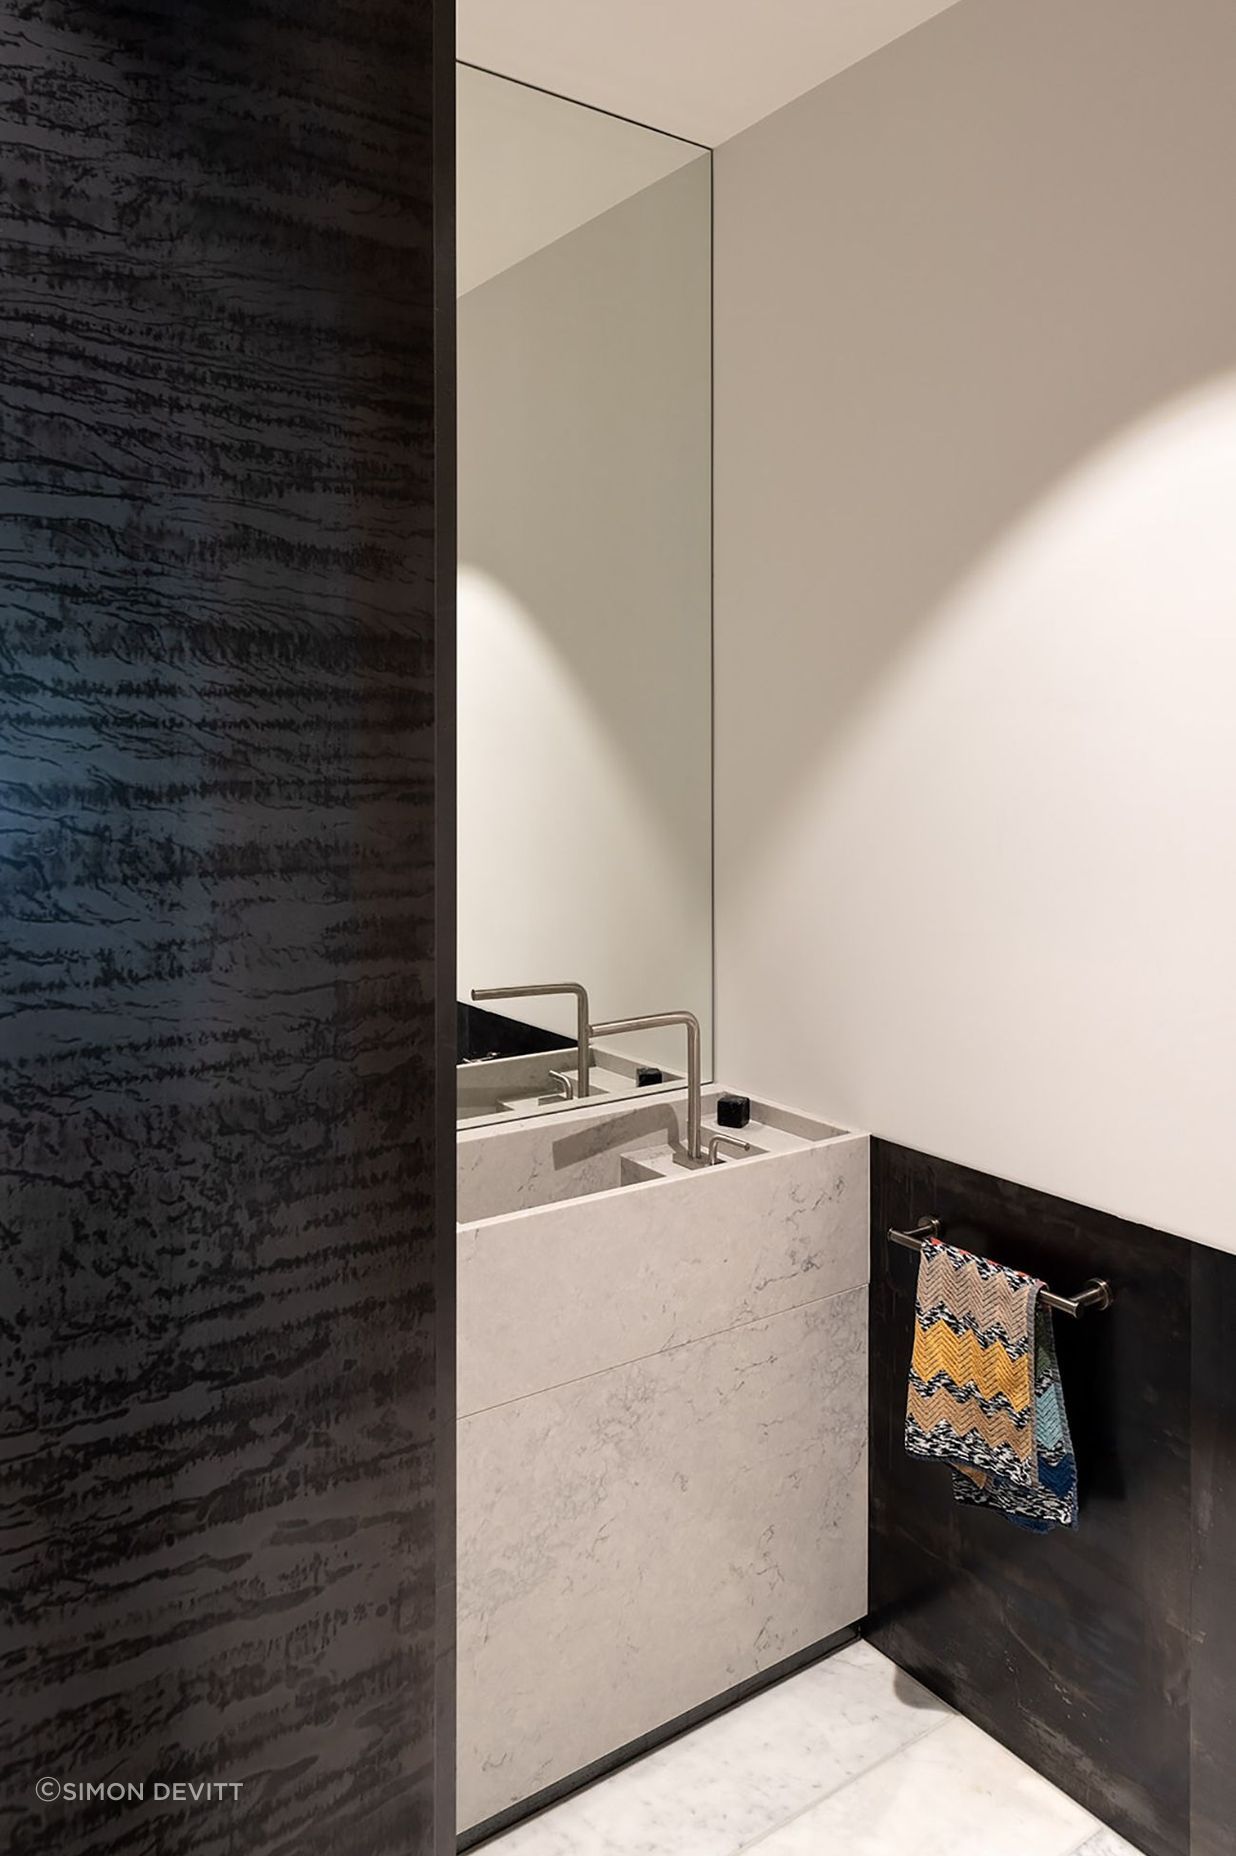 Again, the bathroom surfaces play with light and dark, smooth and textural.